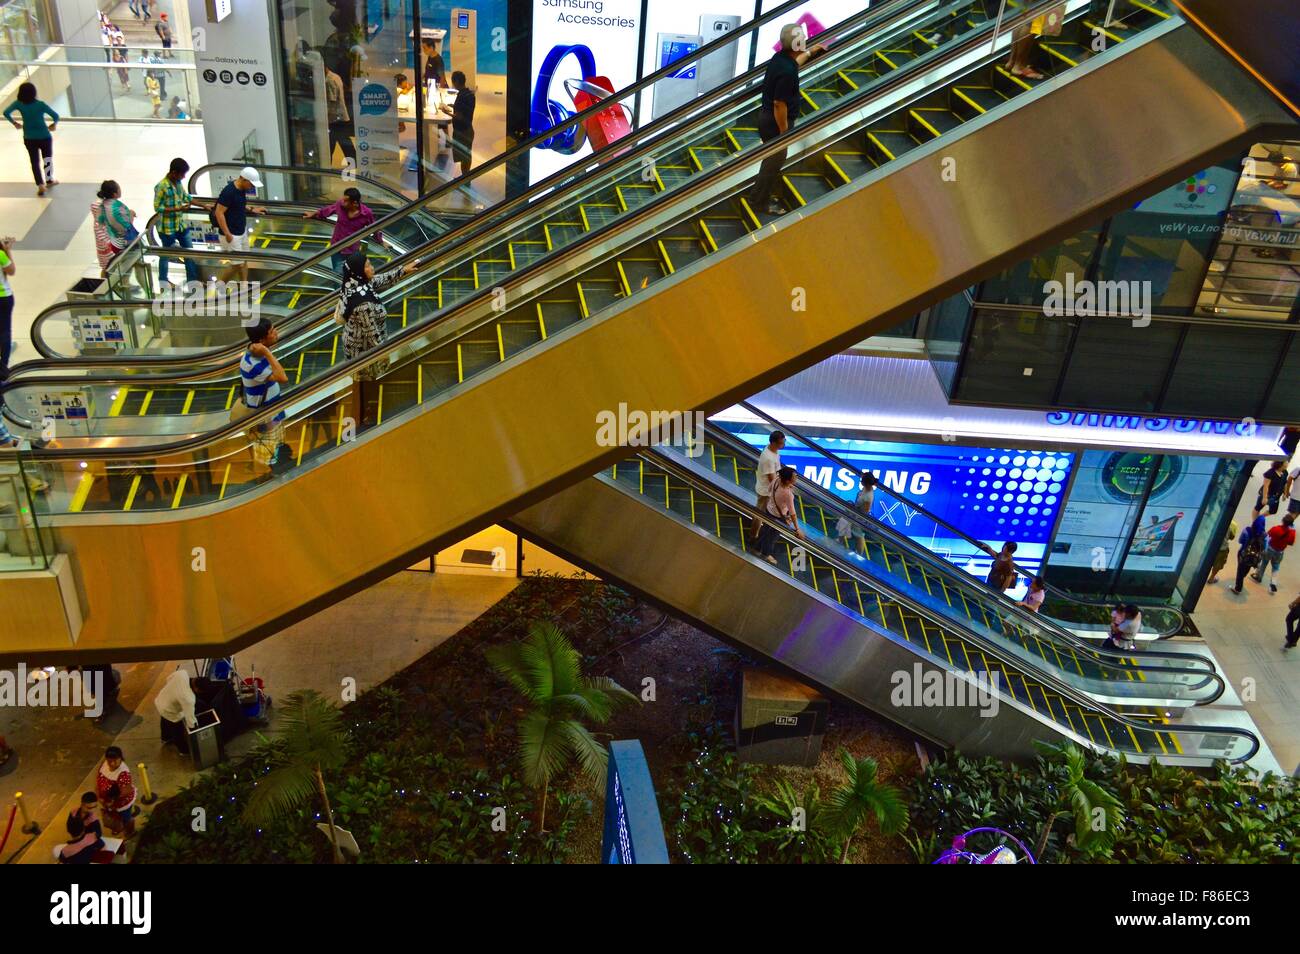 beautiful view of Multi-story view of escalator in shopping modern mall Stock Photo